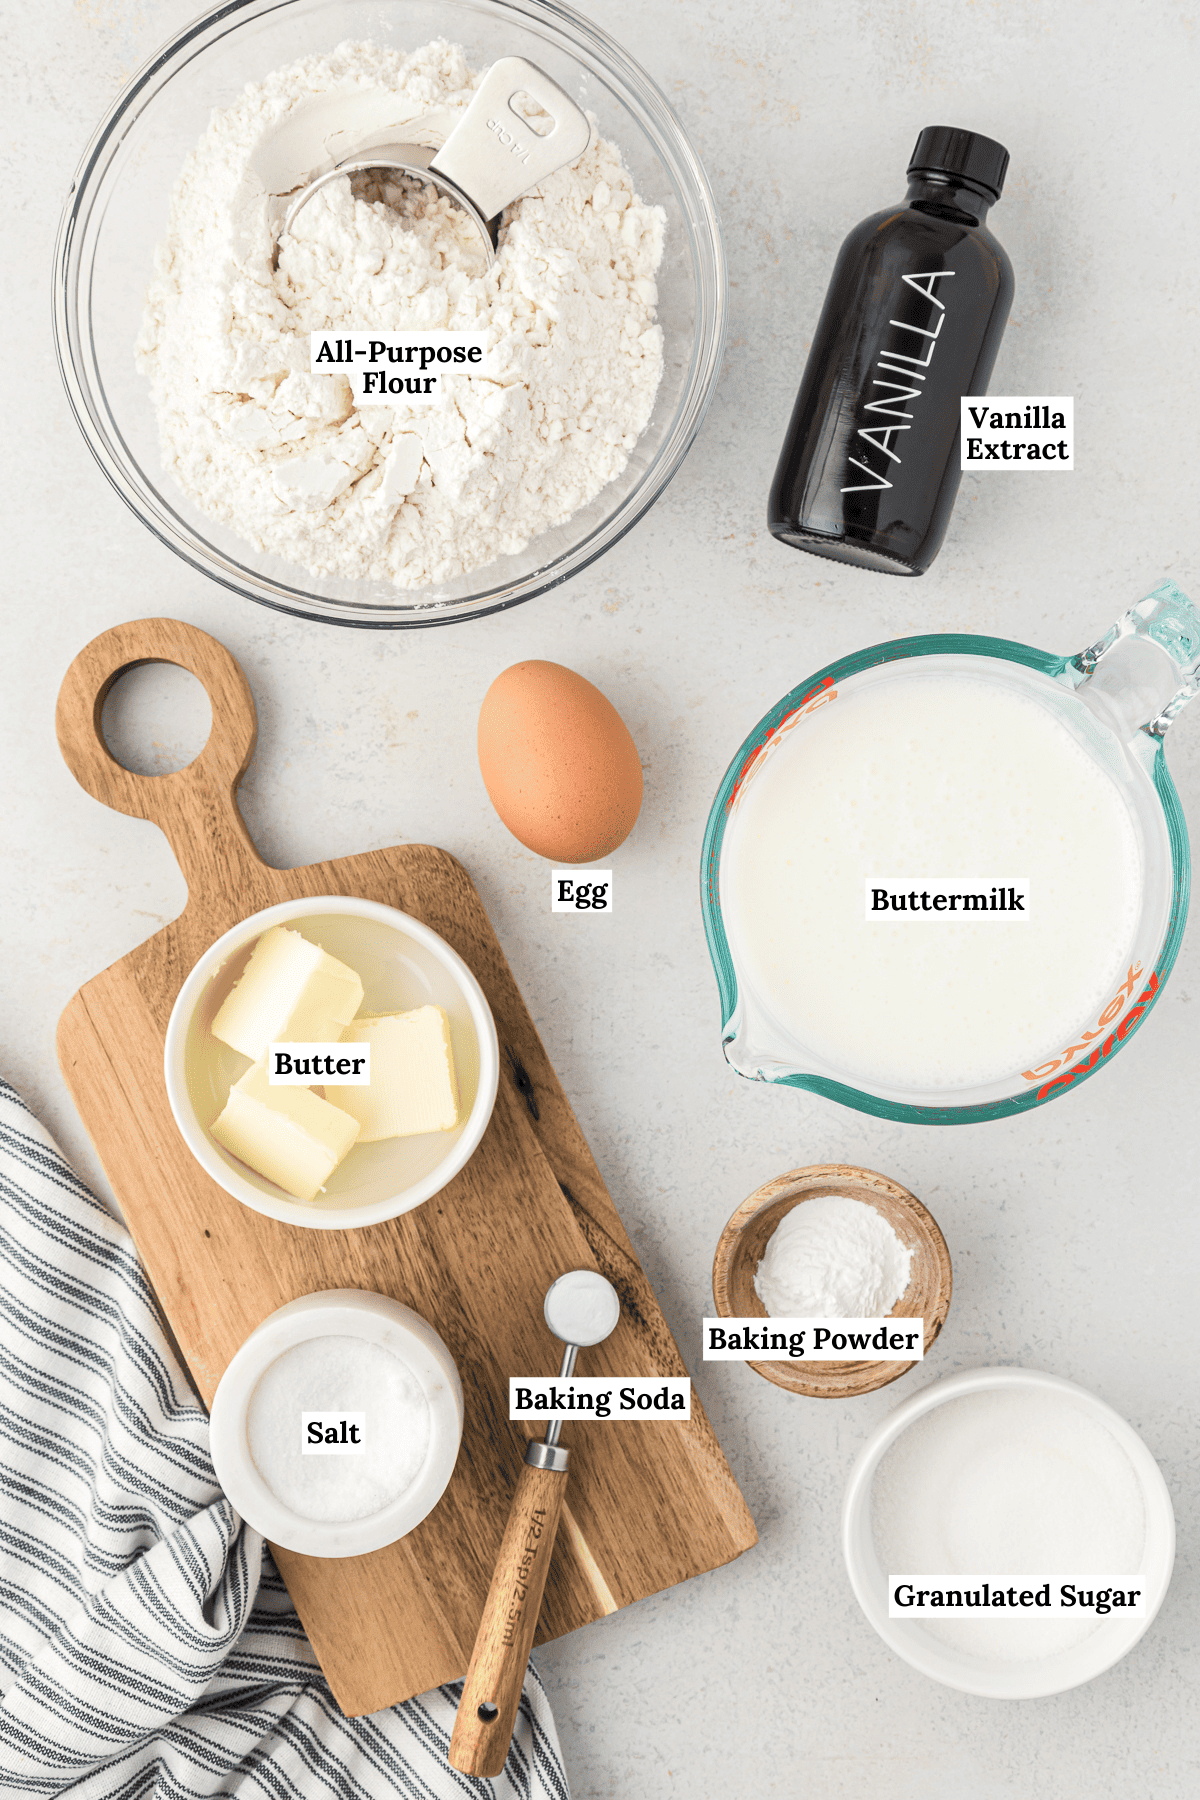 overhead view of the ingredients for buttermilk pancakes including all-purpose flour, vanilla extract, one large egg, buttermilk, baking powder, butter, salt, baking soda and granulated sugar